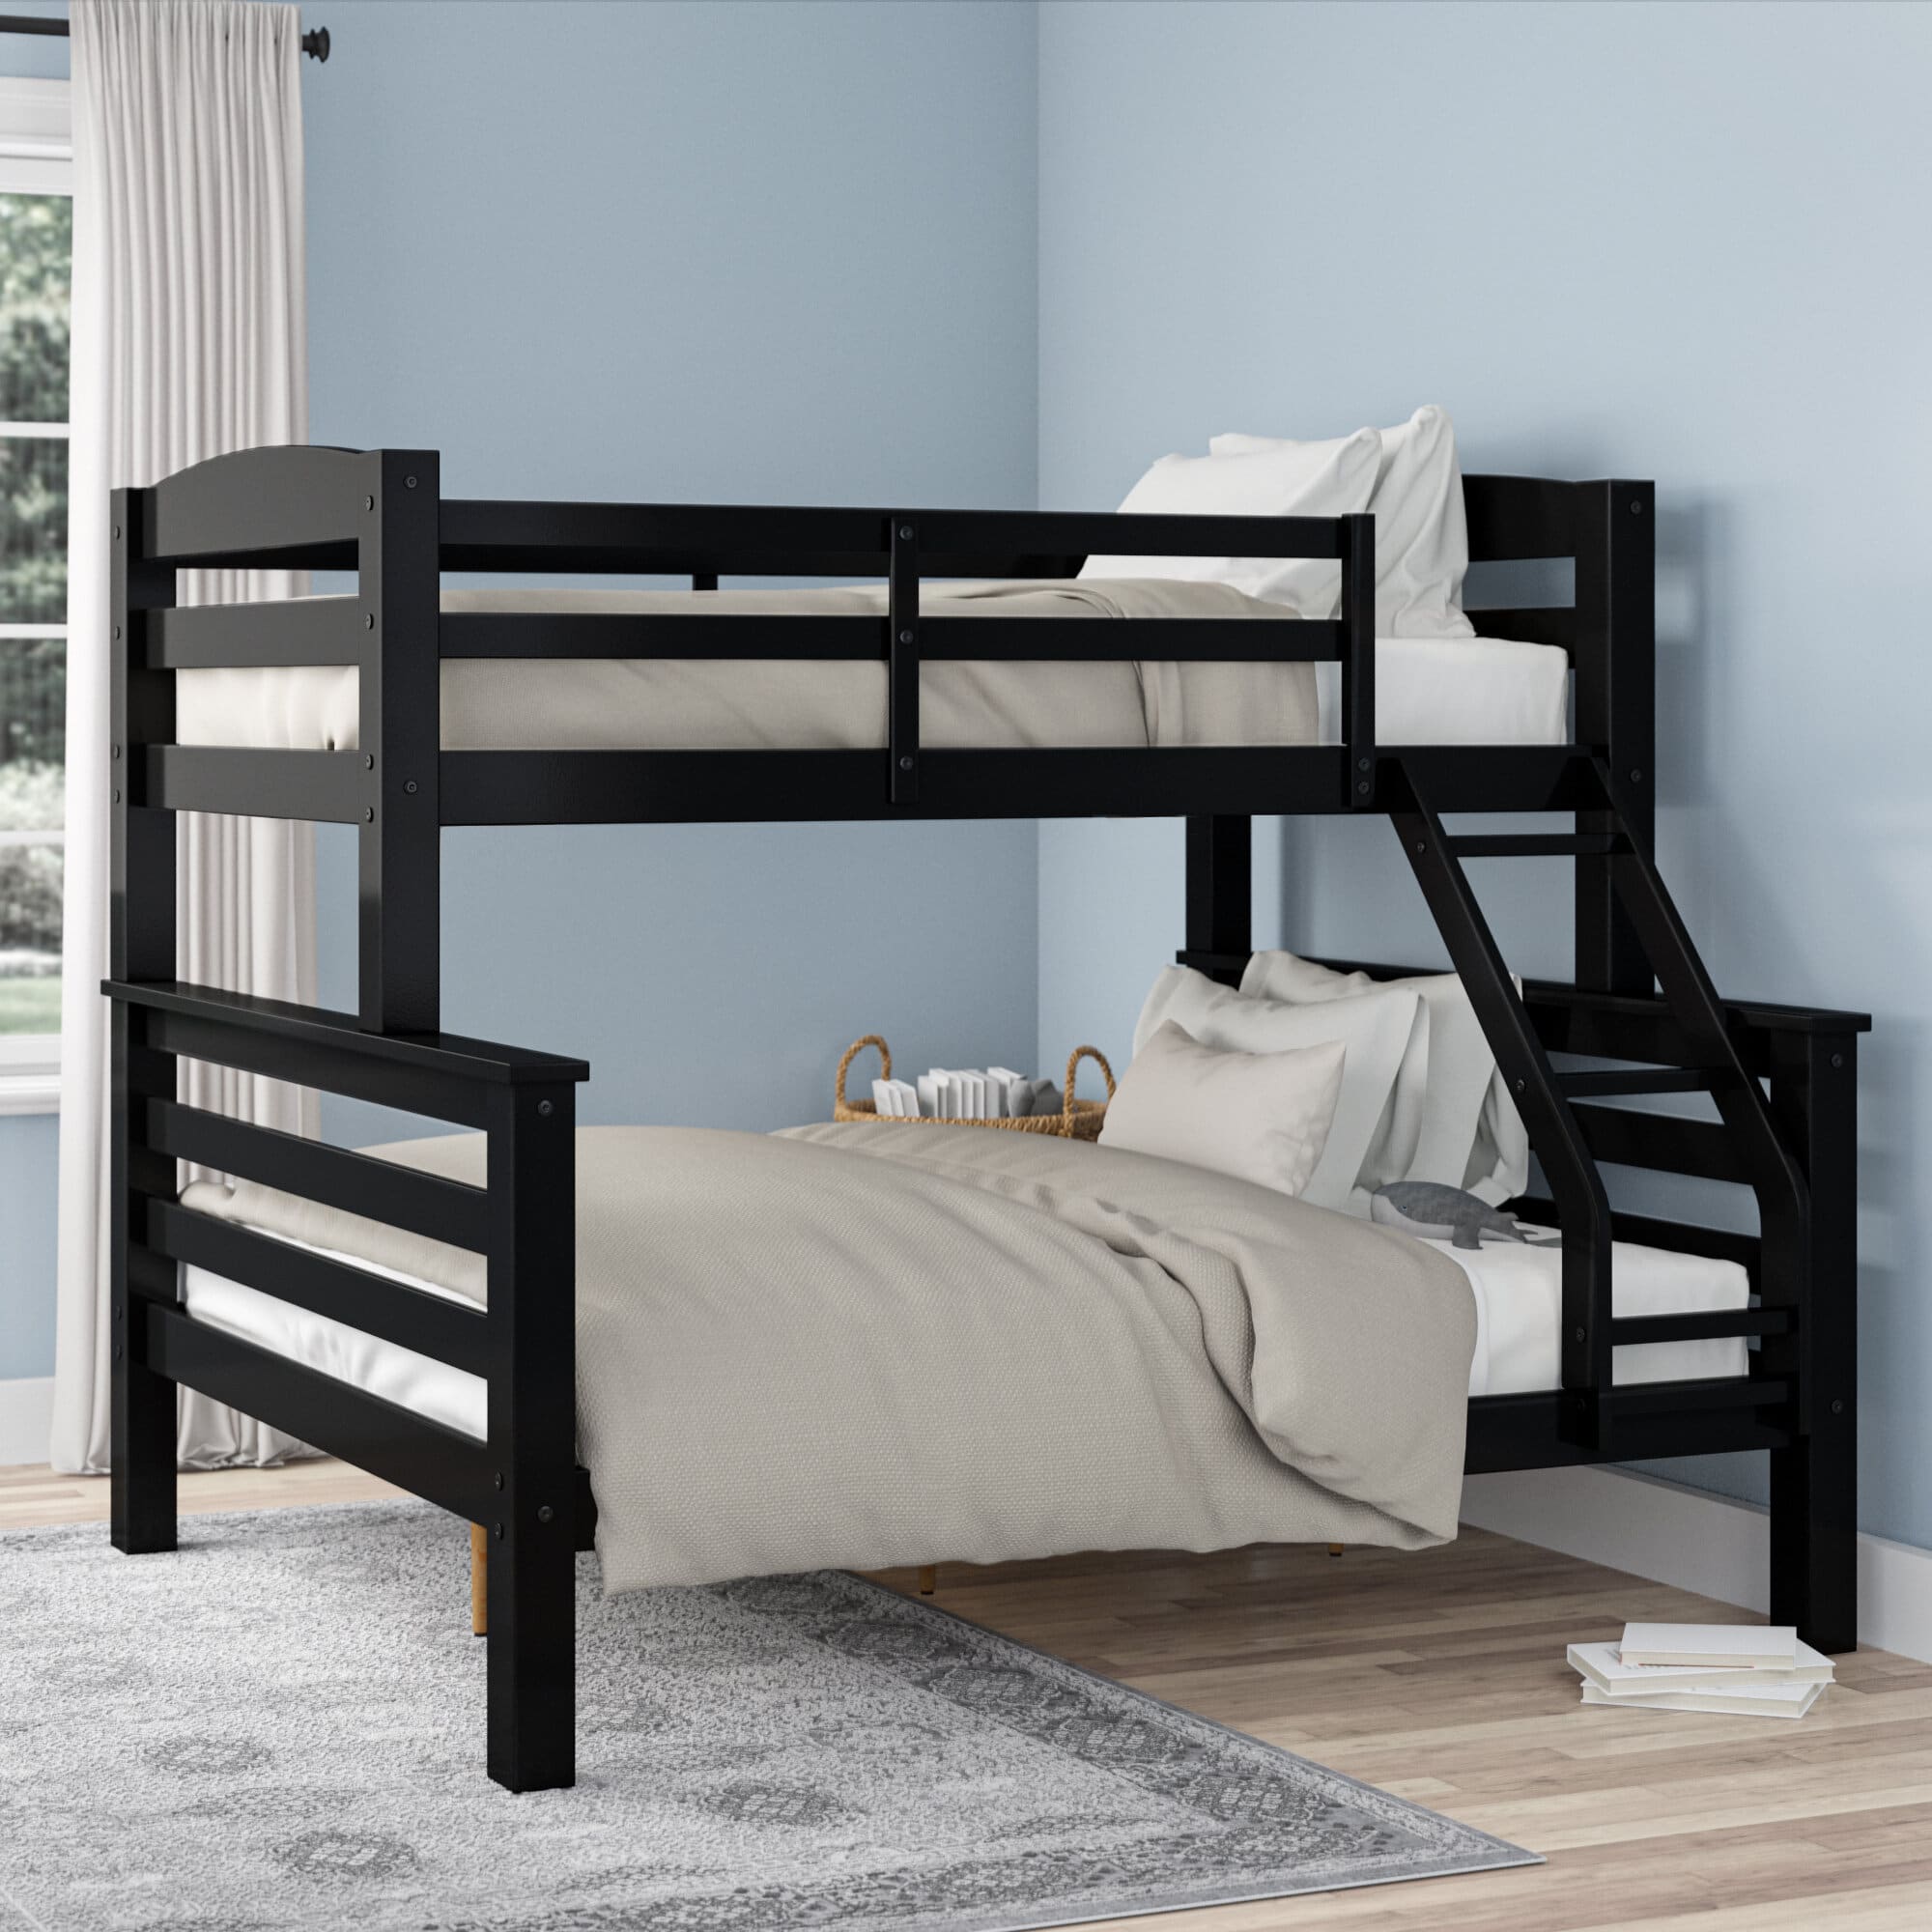 6 Best Twin Over Full Bunk Beds May, Bunk Beds With Full On Bottom